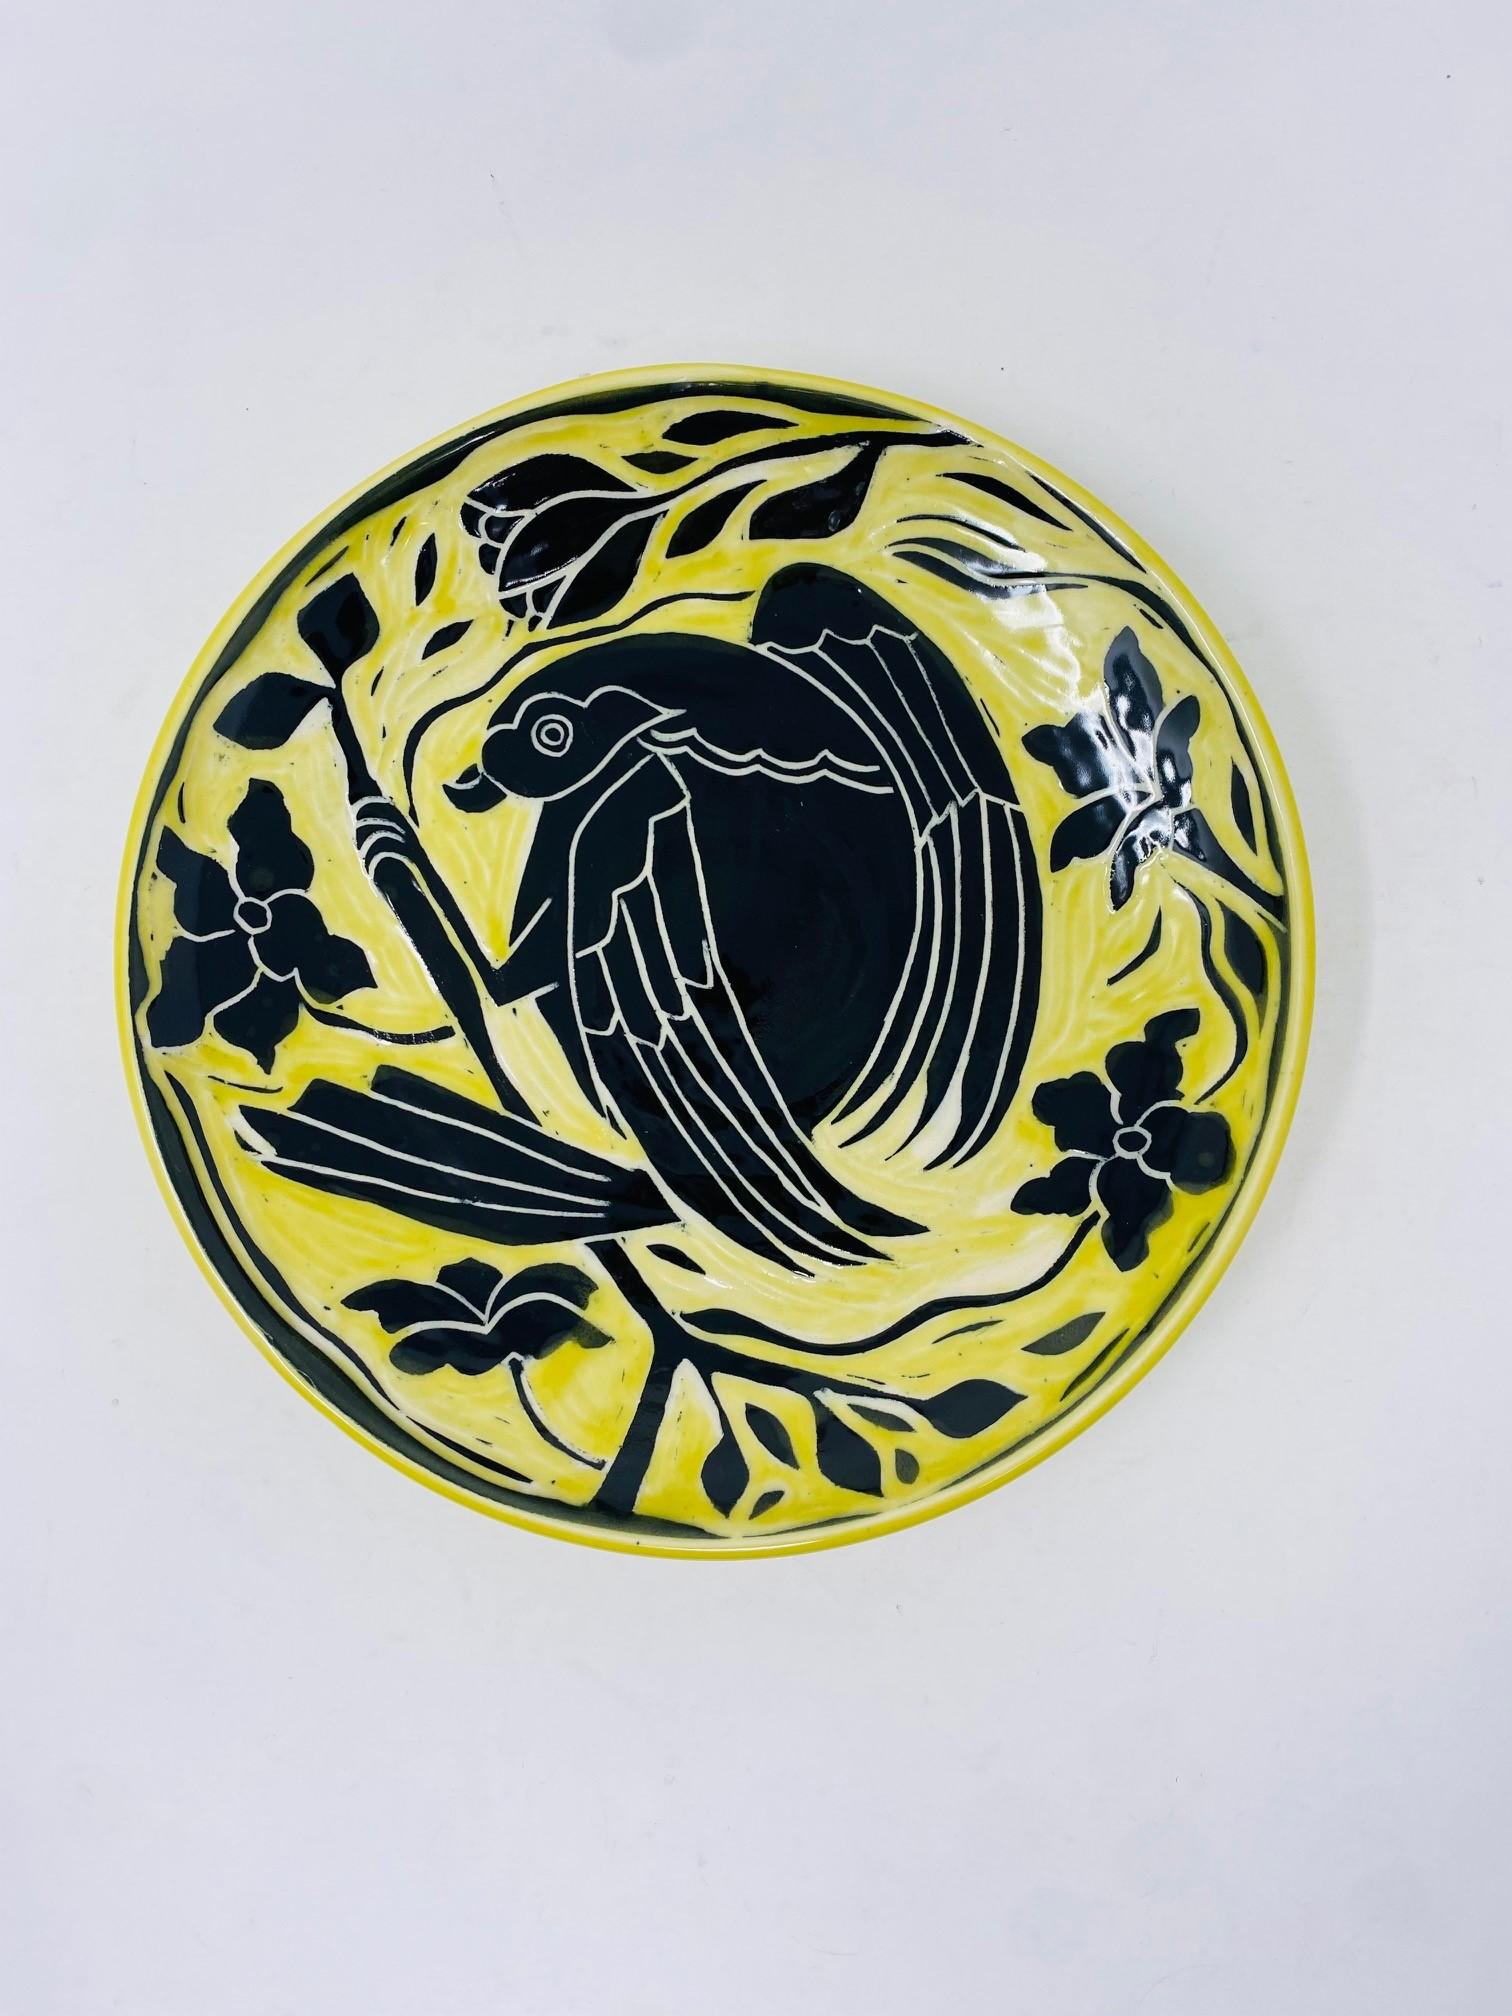 Beautiful ceramic plate with design.  This piece is joyful, eccentric and classic at the same time.  The ceramic is finished with a beautiful yellow glaze that envelops a bird figure on a branch.  The classic depiction combined with the yellow hues